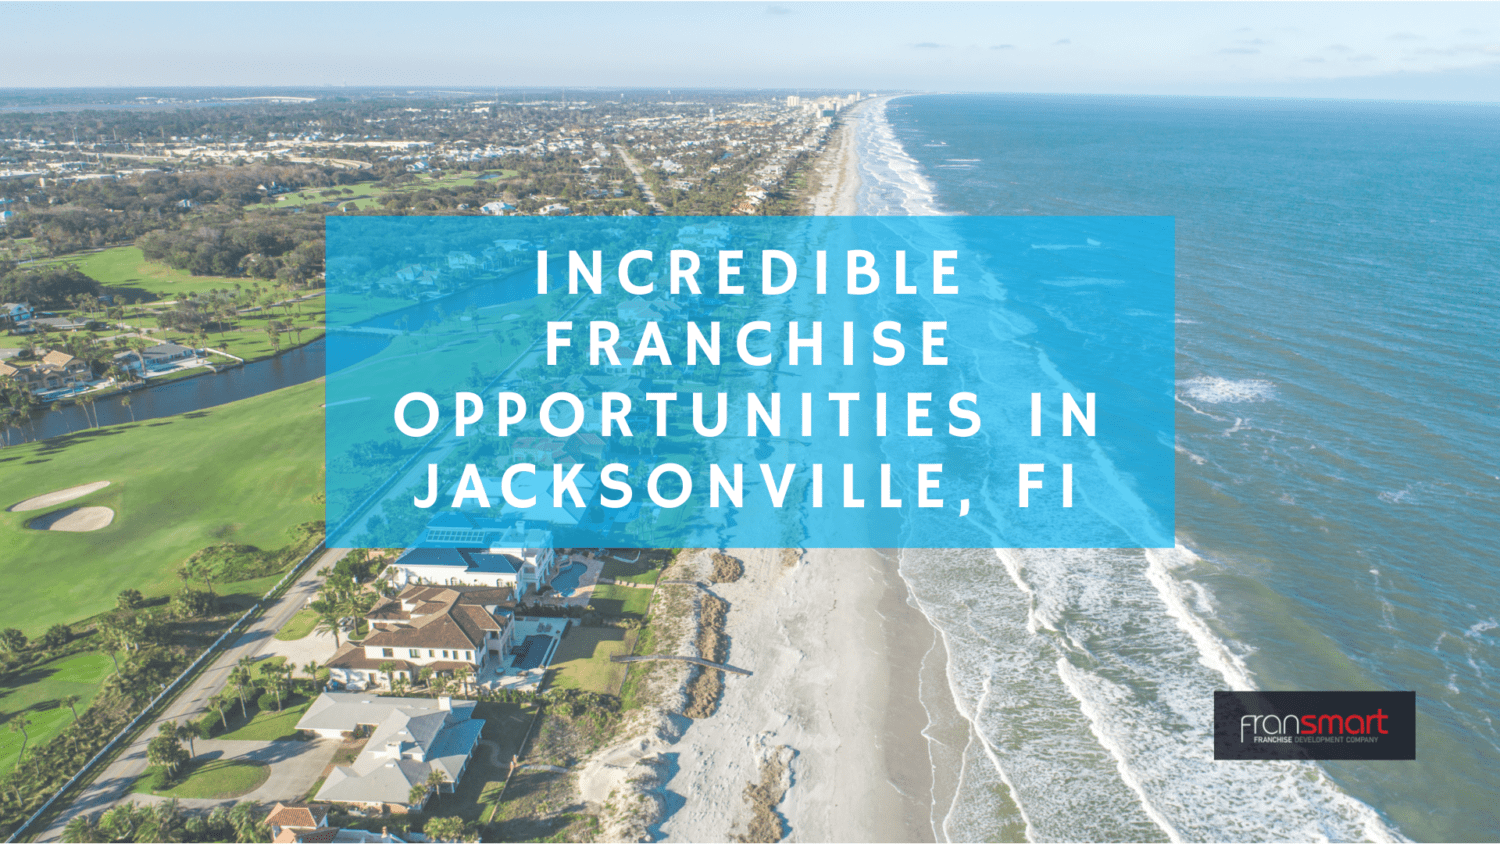 Incredible Franchise Opportunities in Jacksonville, FI